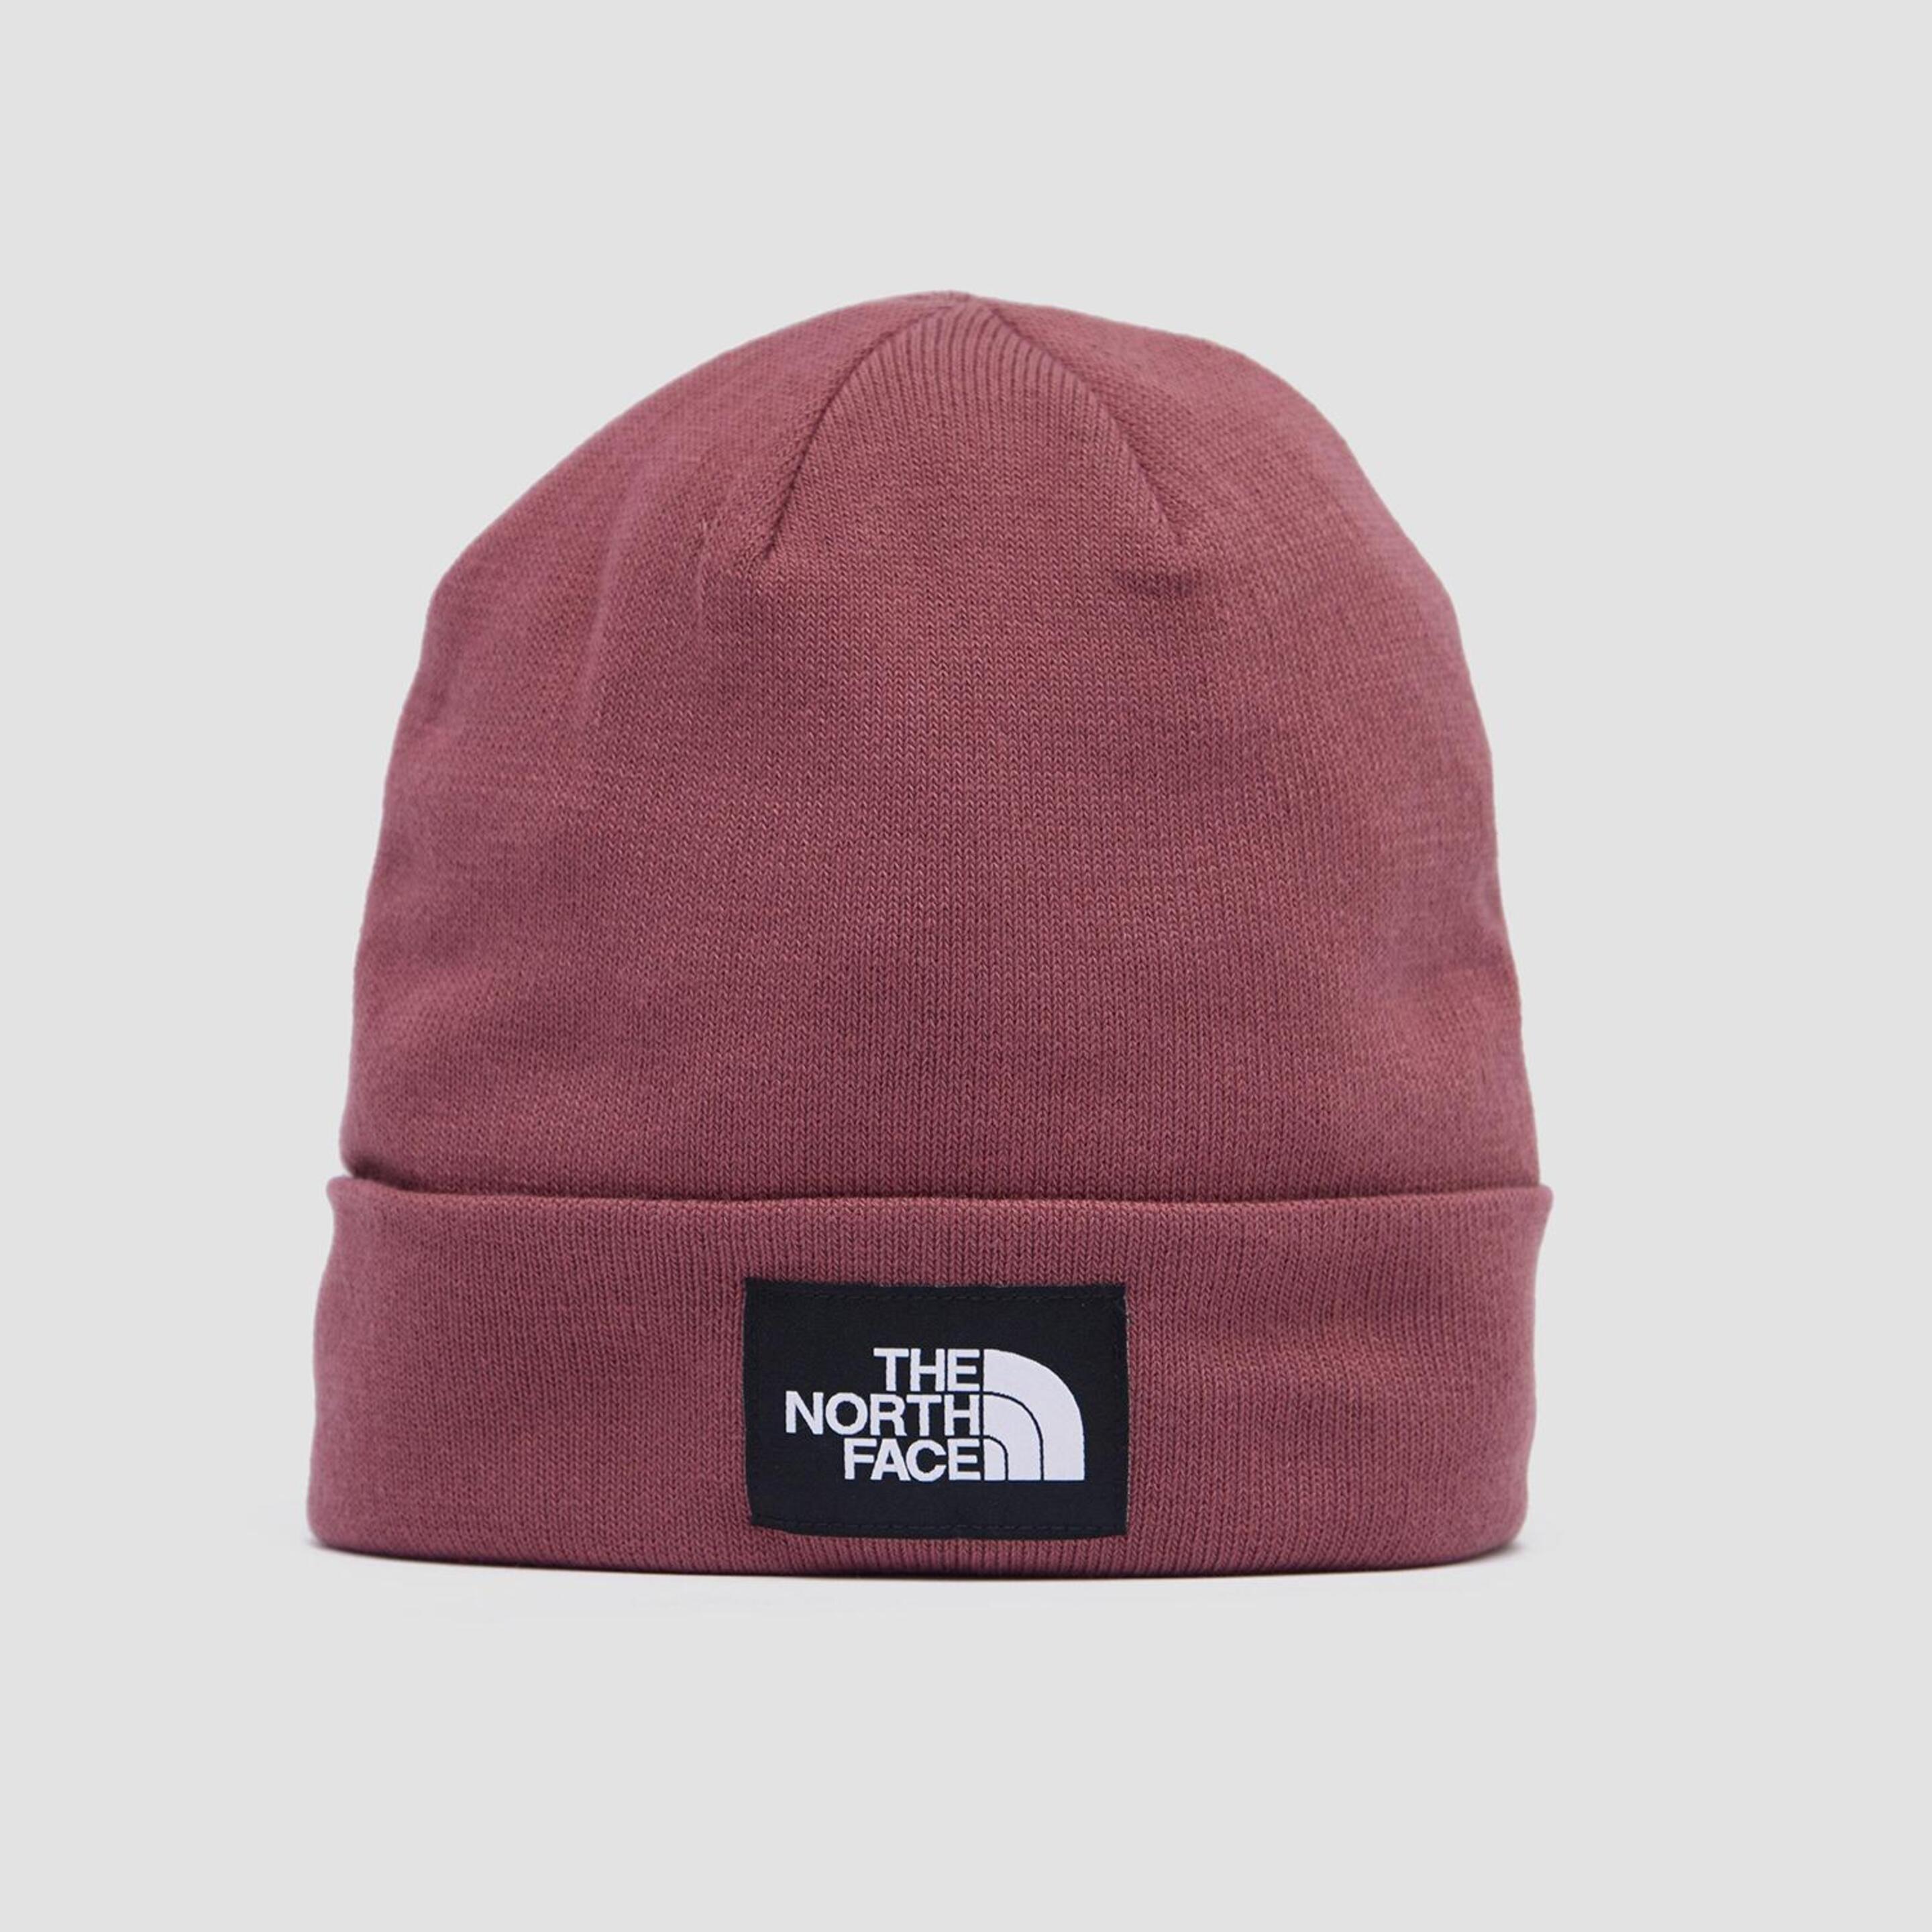 The North Face Dock Worker - rojo - Gorro Montanha